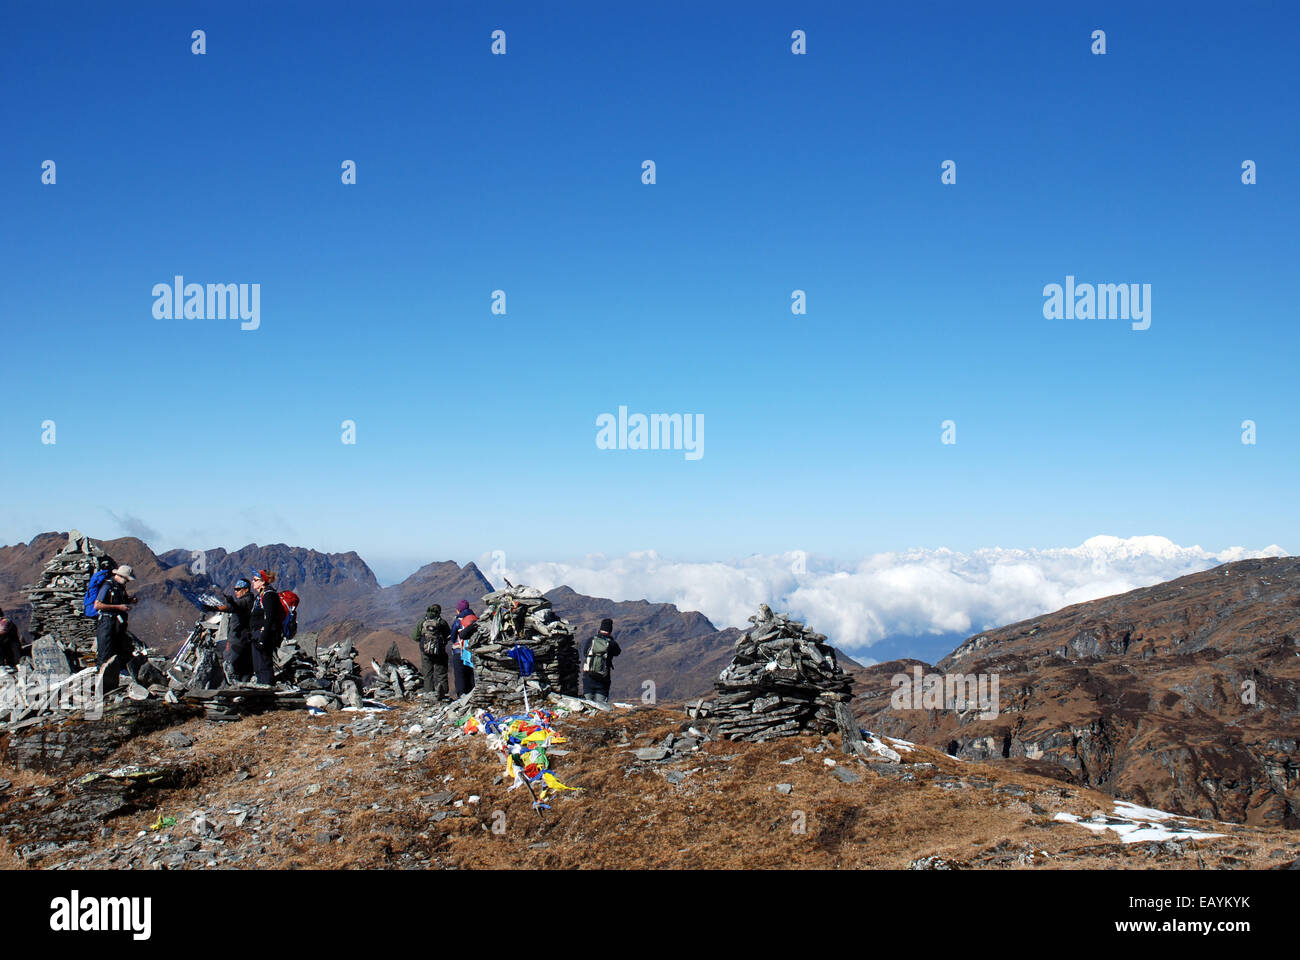 A group of trekkers at a high point on the Singalila ridge in the Indian Himalayas close to the mountain of Kanchenjunga Stock Photo